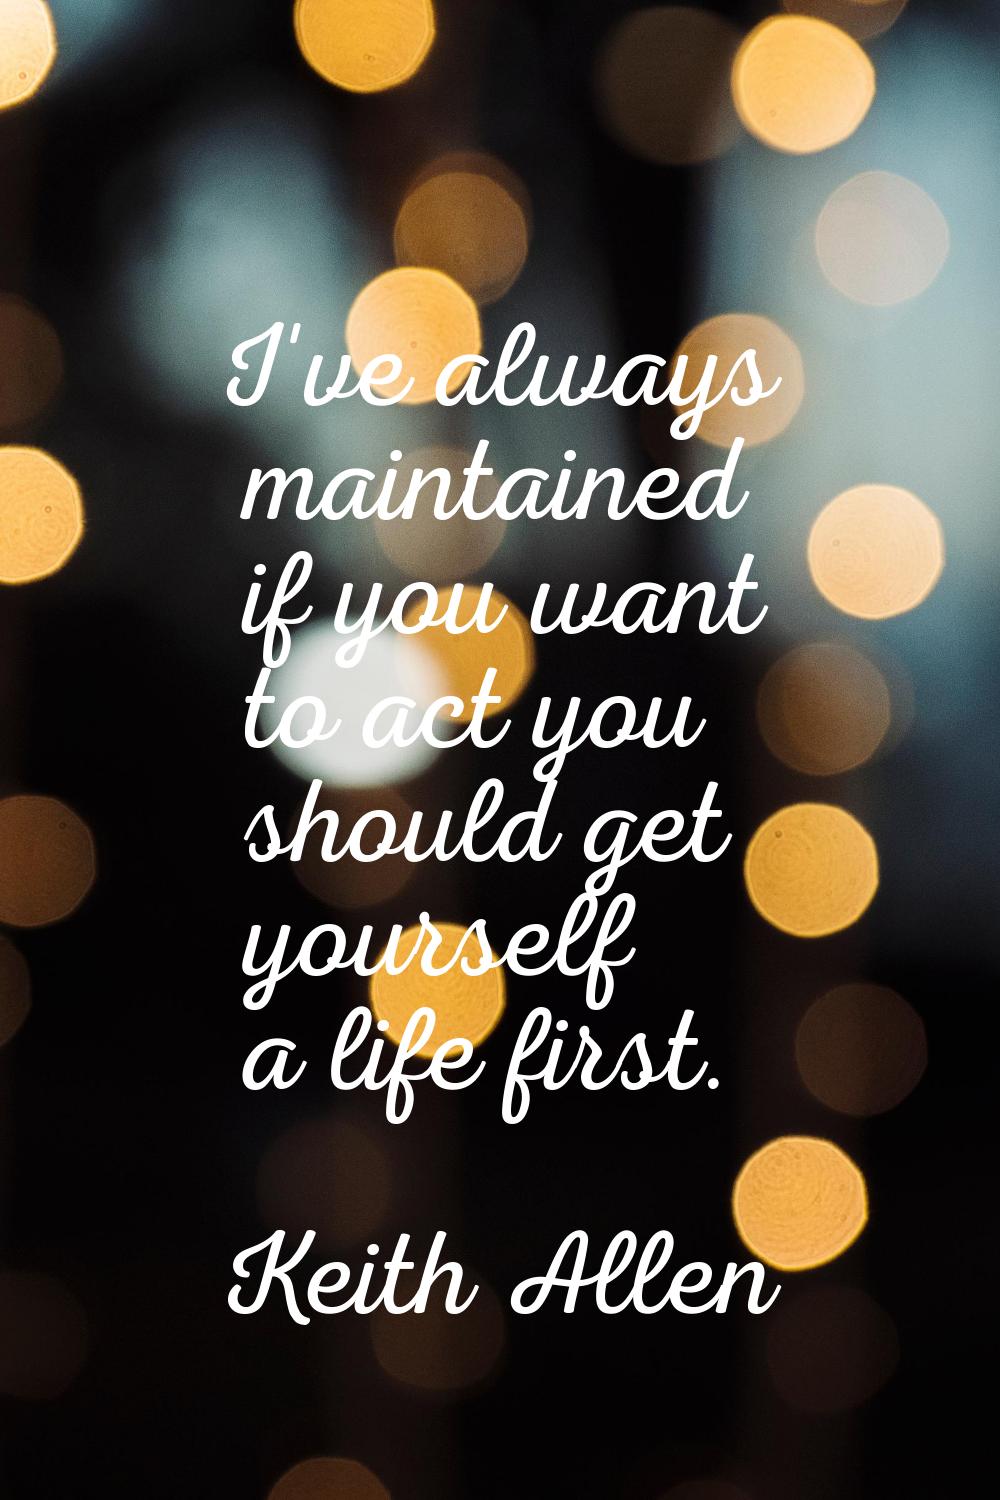 I've always maintained if you want to act you should get yourself a life first.